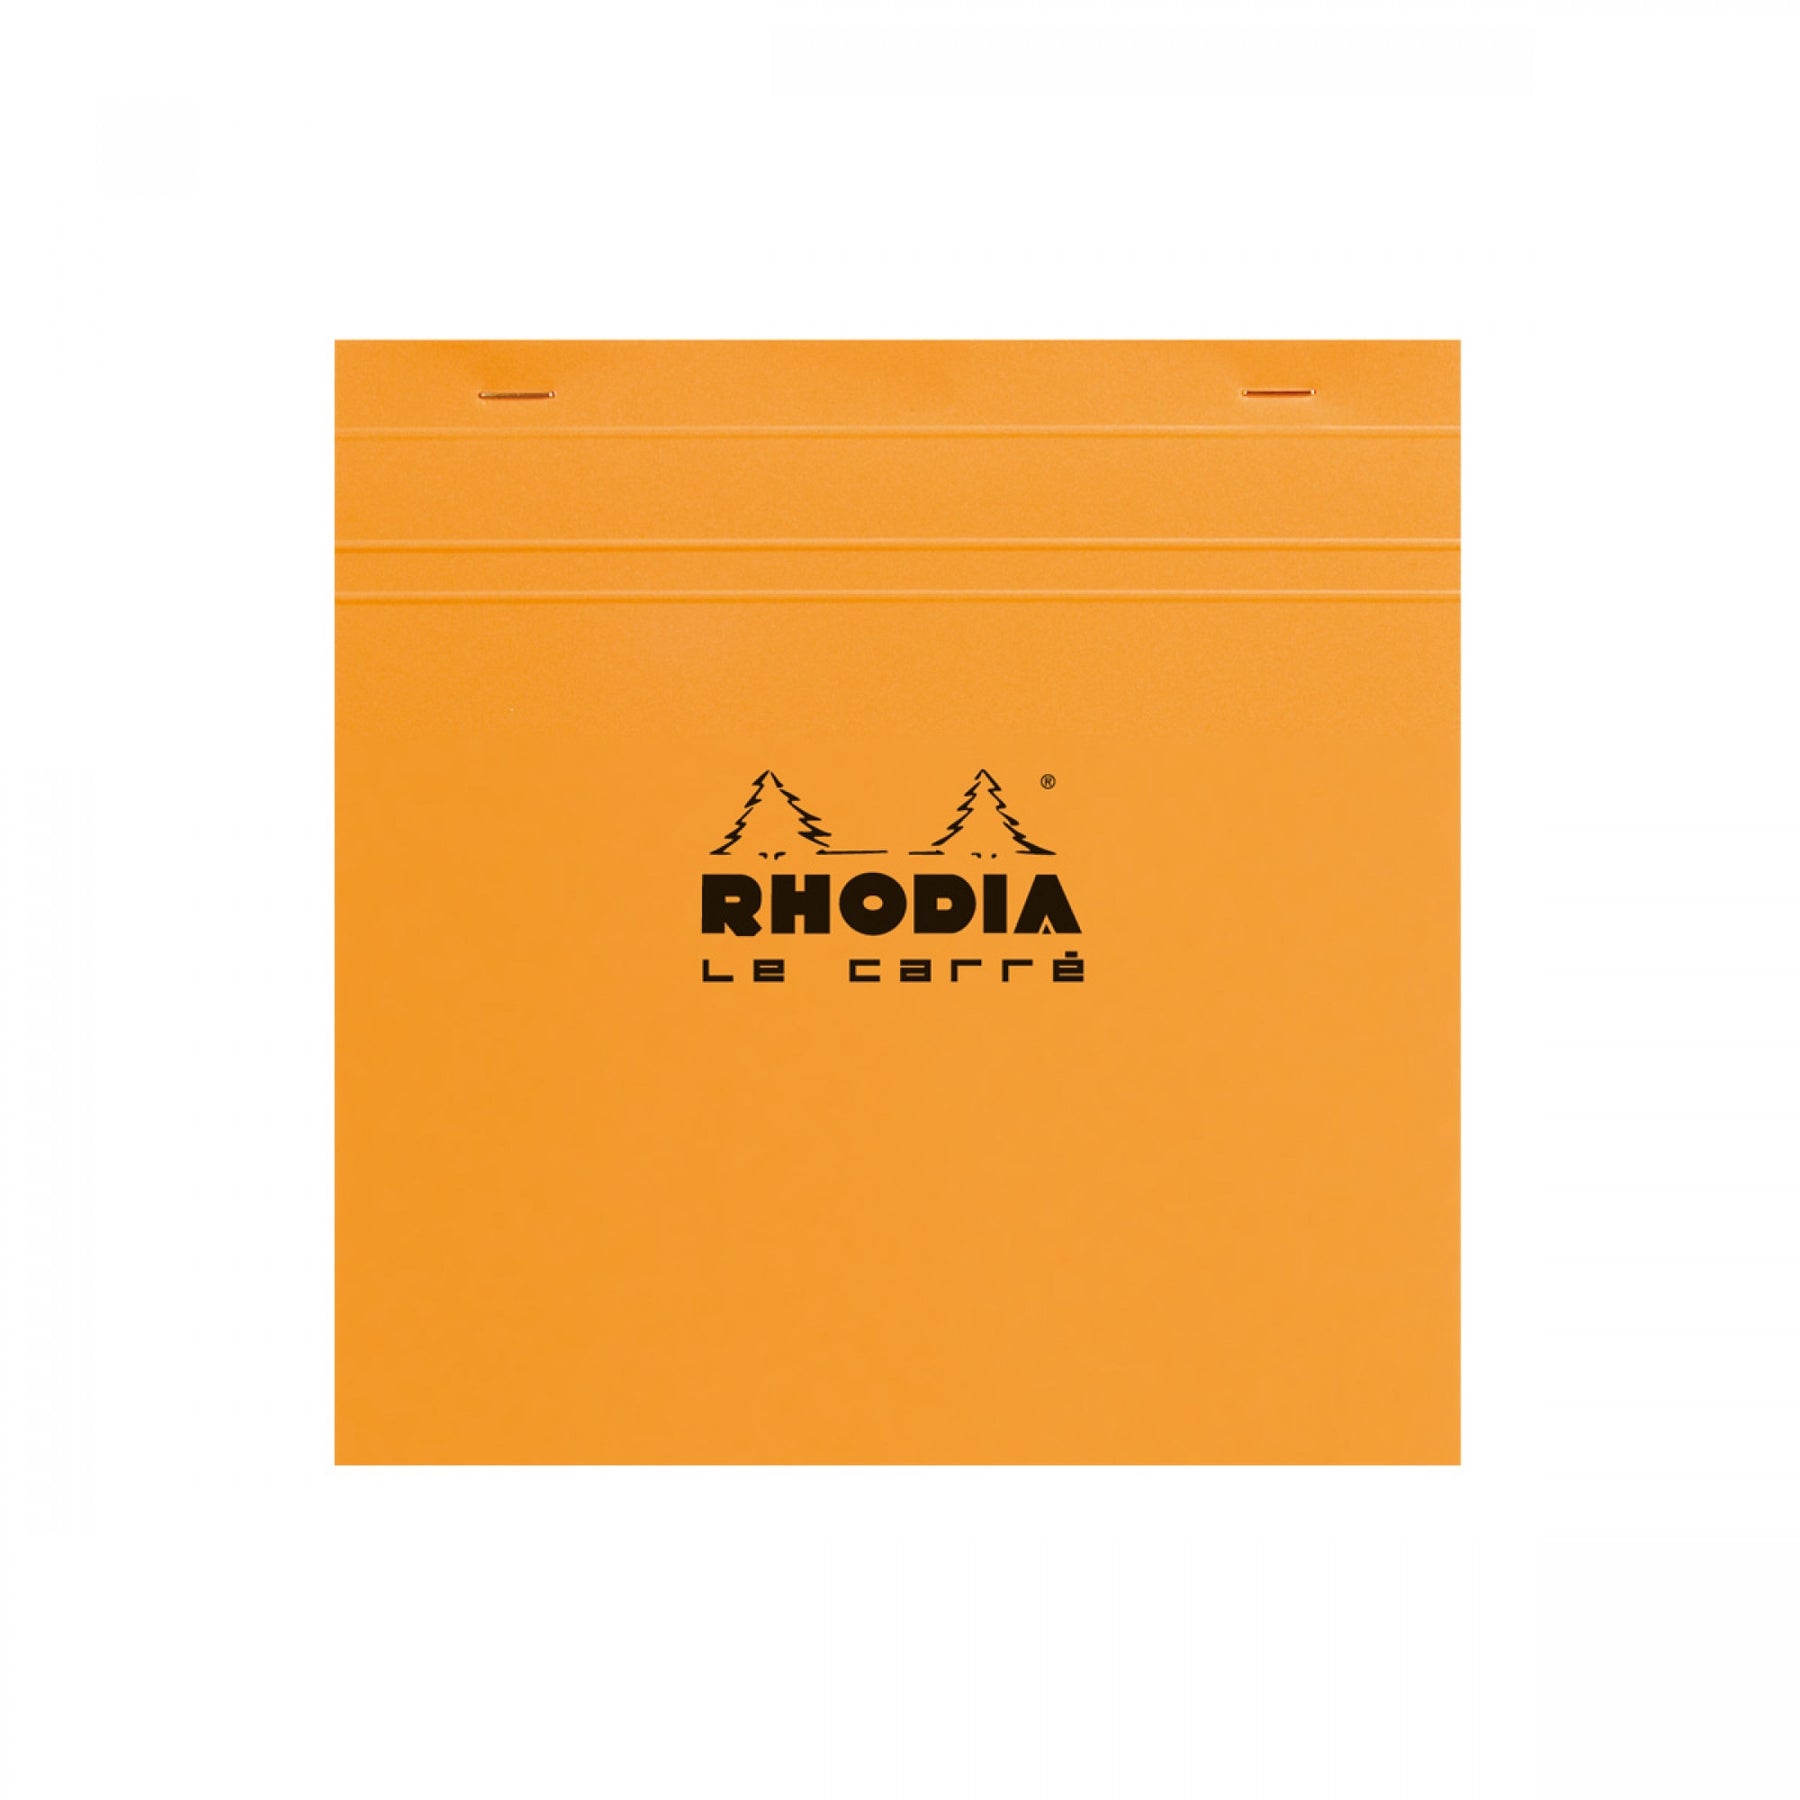 Classic Rhodia pads, with acid-free extra white paper, microperforated sheets, stiff back cover and reinforced staples.  Measures 5 3/4 x 5 3/4" 80 Sheets (160 Pages) Graph Paper Paper Weight: 80 GSM Orange Coated Cardboard Cove